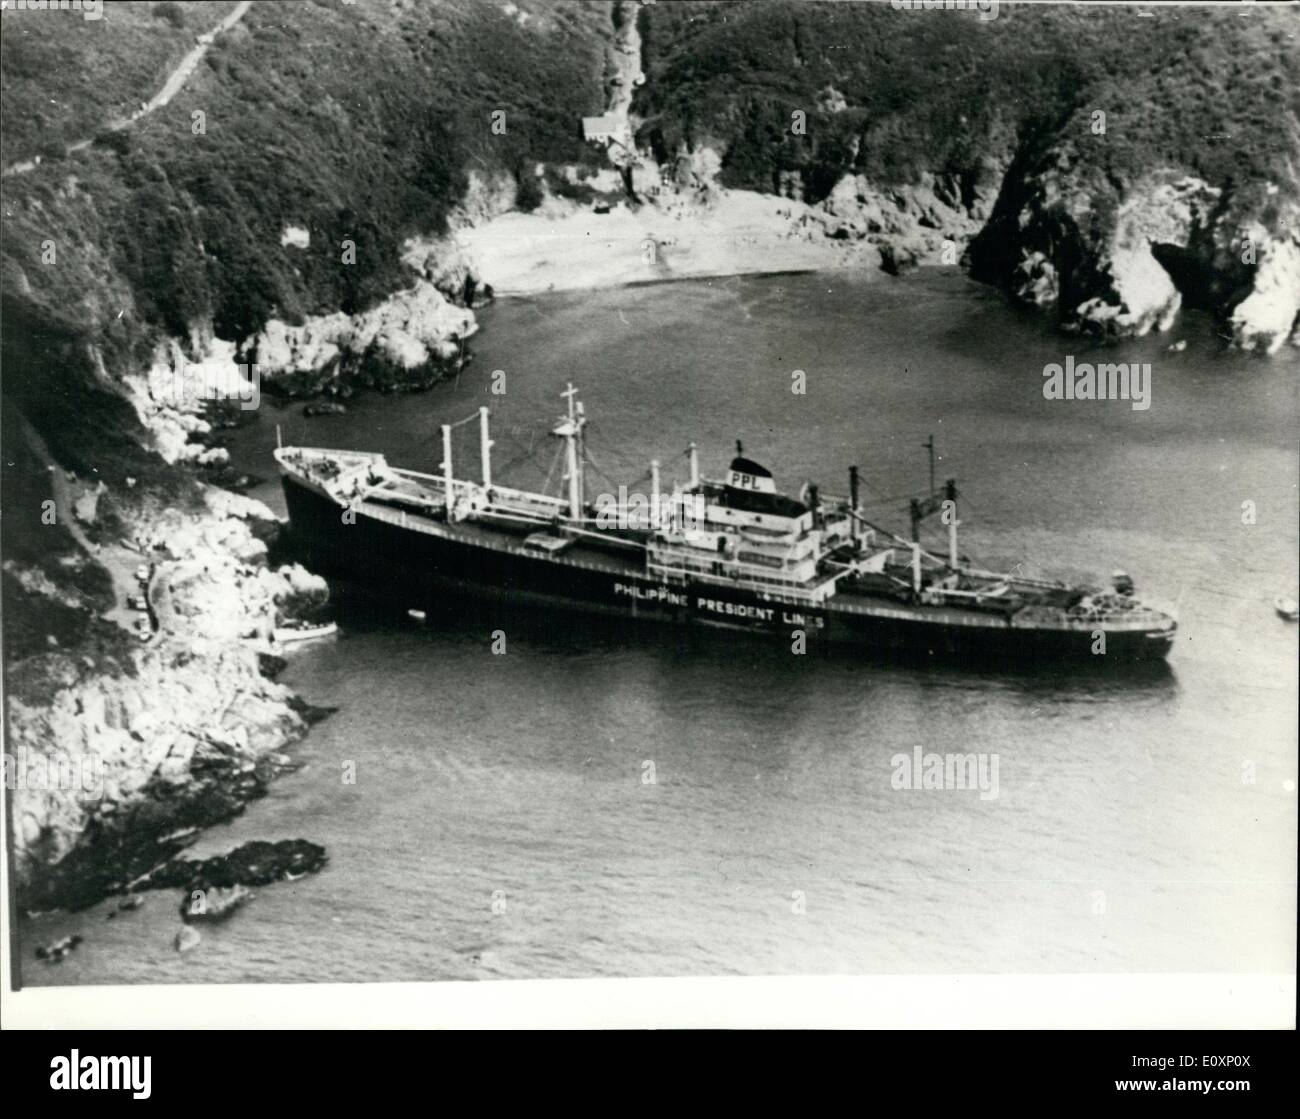 Jul. 07, 1967 - Ship aground in Guernsey: The Philippine vessel, President Garcia, a 10,826 ton cargo ship crashed full speed into the rocks of Southern Guernsey during the night. Today the ship, the Philippine Garcia was high and dry in Saints Bay. Her crew of 53 was safe. Photo shows aerial view of the cargo ship President Garcia aground off the coast of Guernsey today. Stock Photo